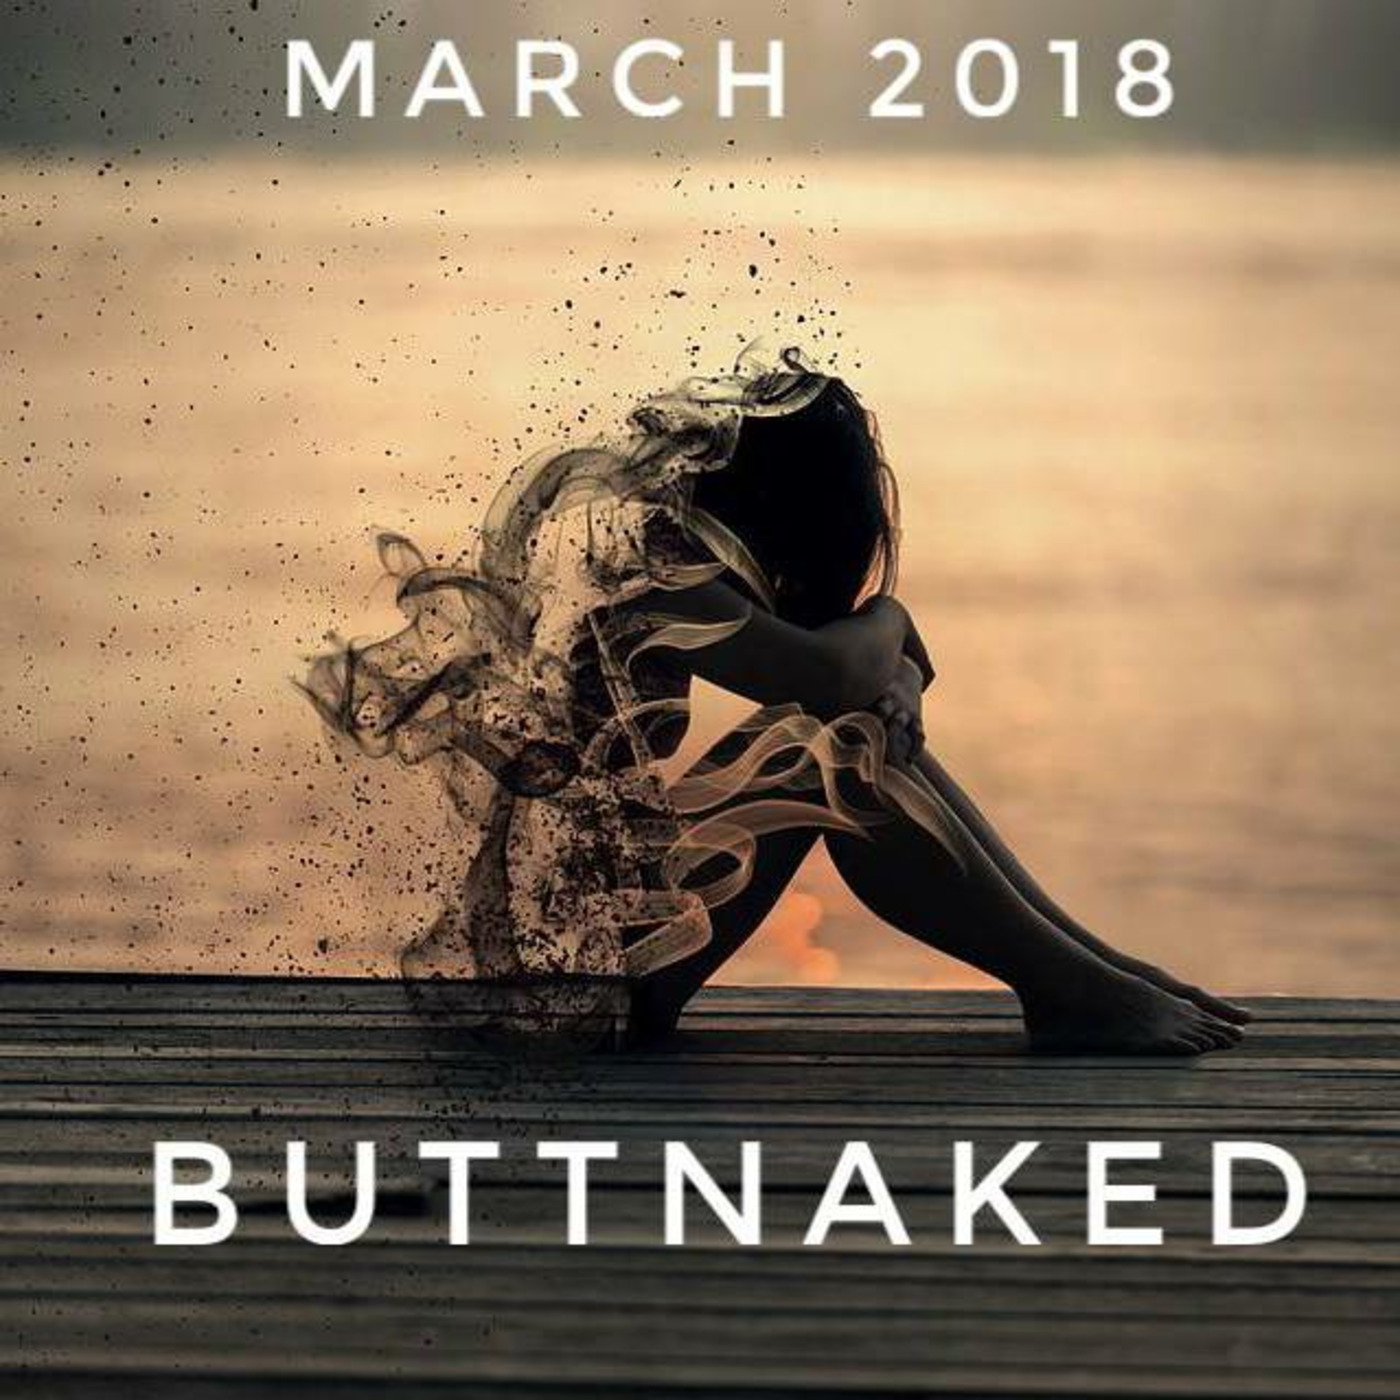 March 2018 - Iain Willis pres The Buttnaked Soulful House Sessions